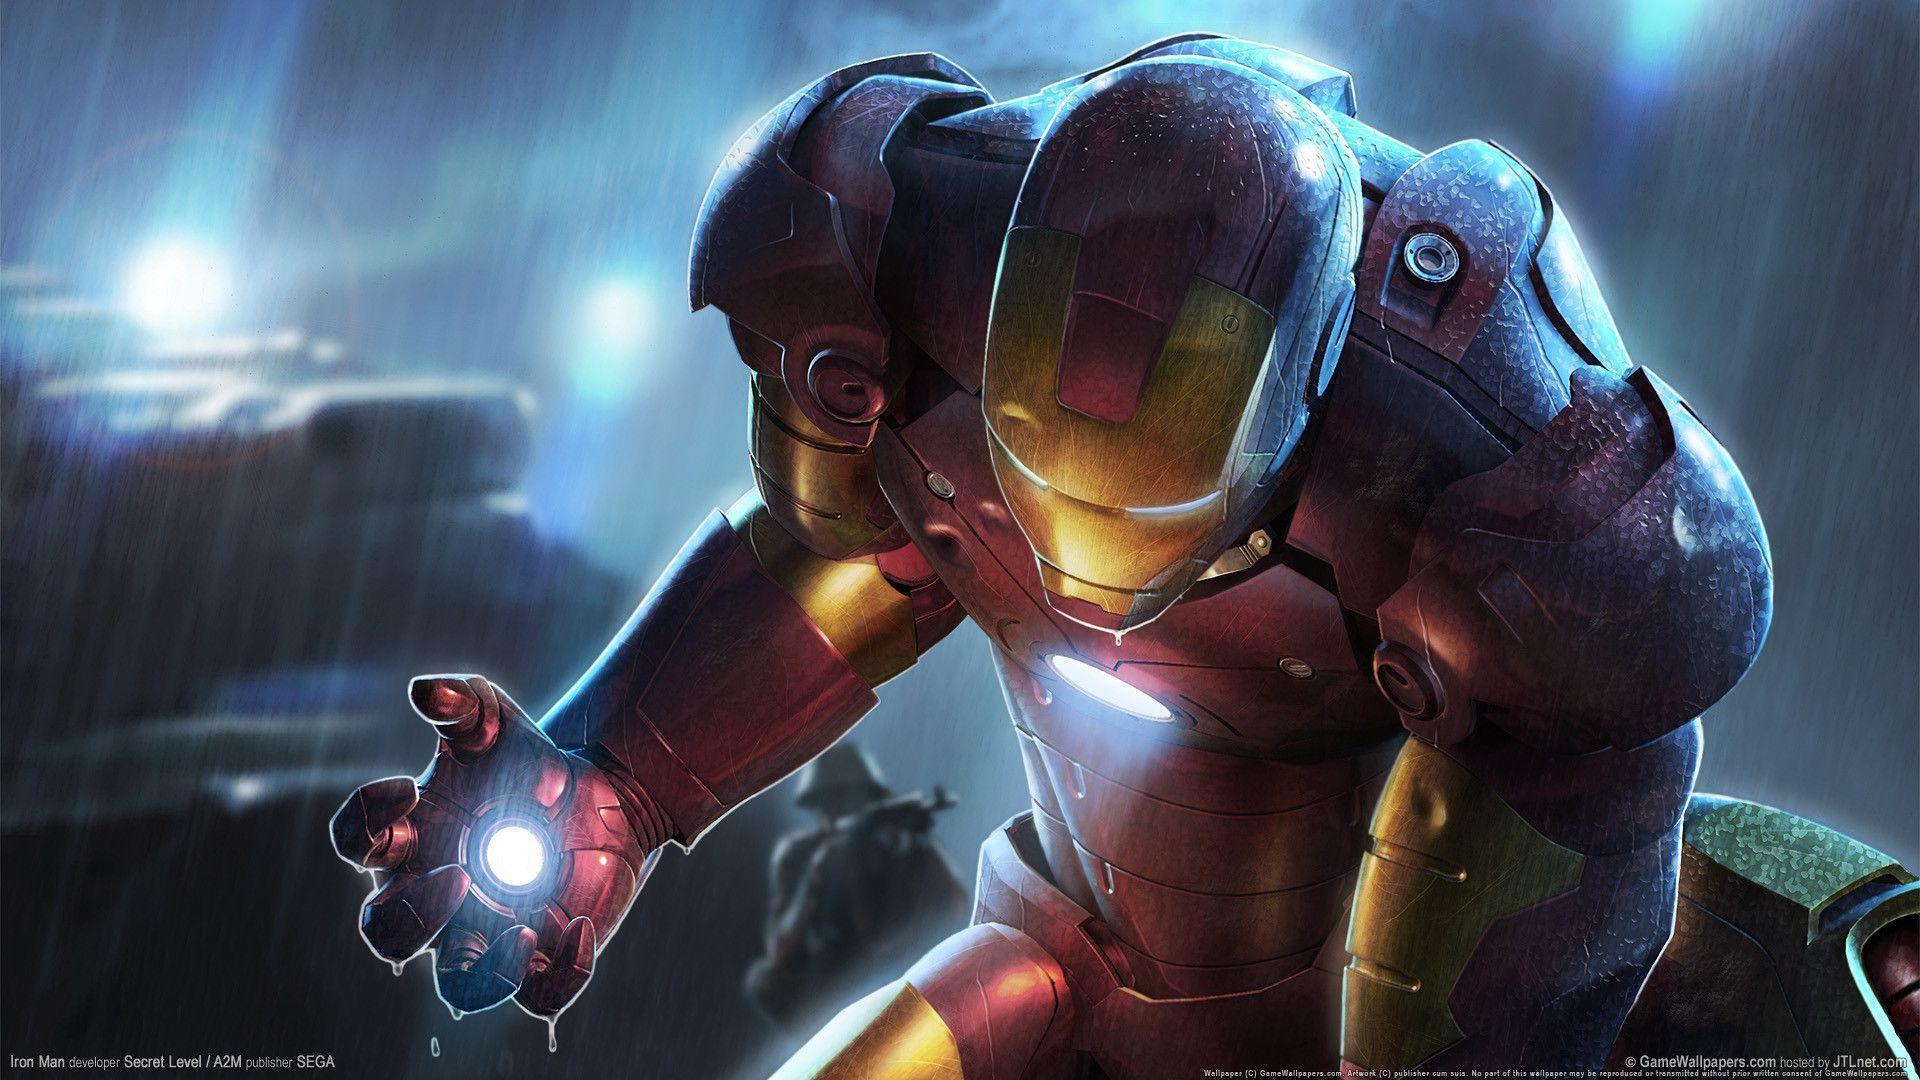 Iron Man 2 Photo Inspiration Pack, 10 Hi Quality Picture